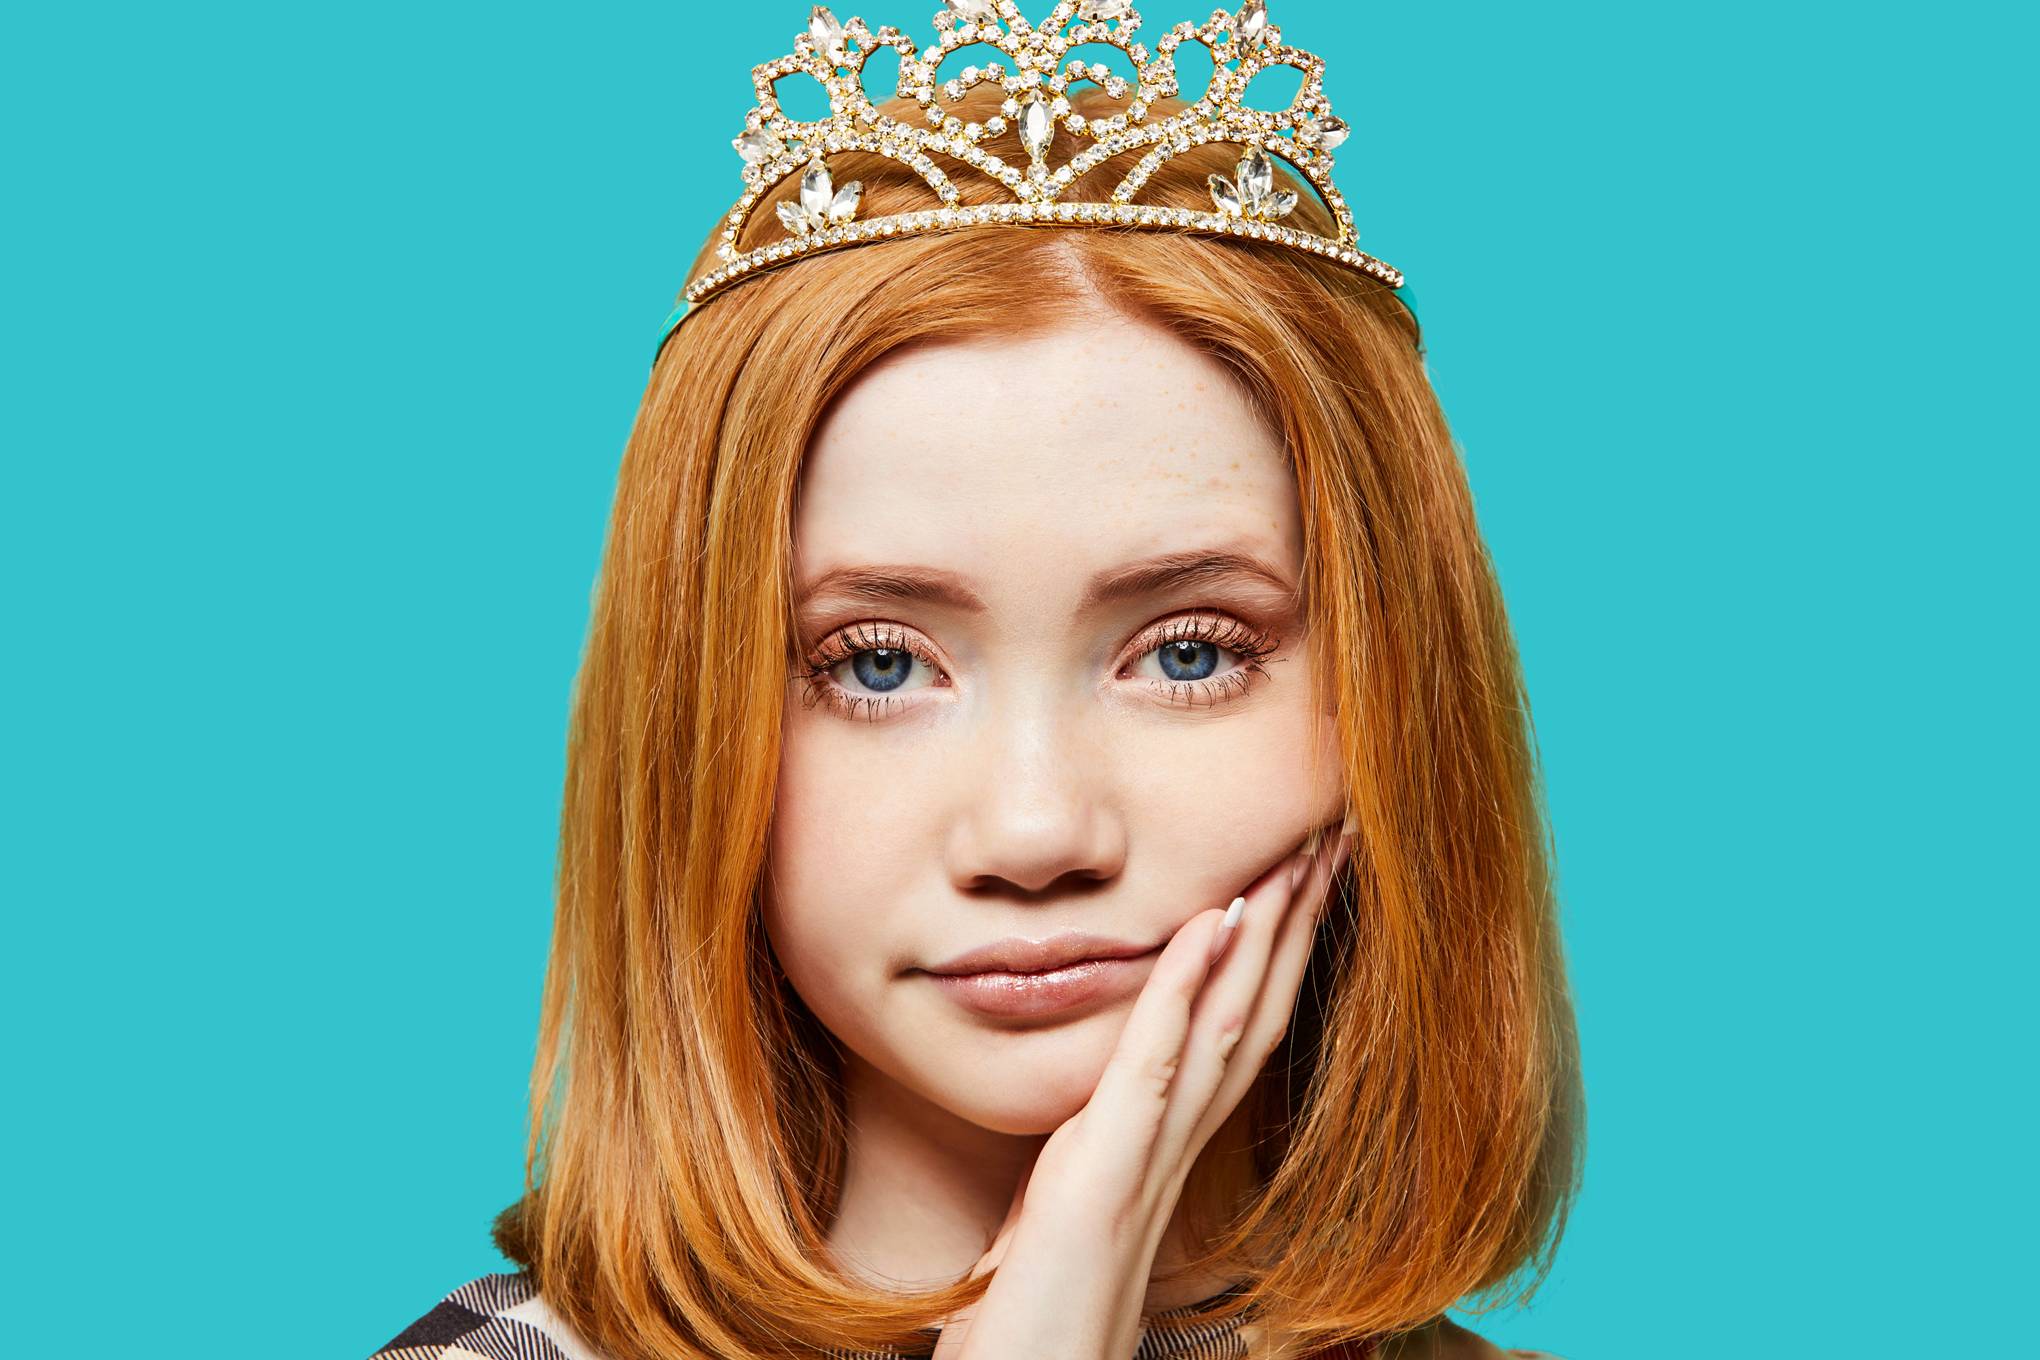 A portrait of a young ginger teenage girl with ginger hear down to her shoulders. She wears a crown on a her head and a non-plussed look on her face as she rests her head in her hand.